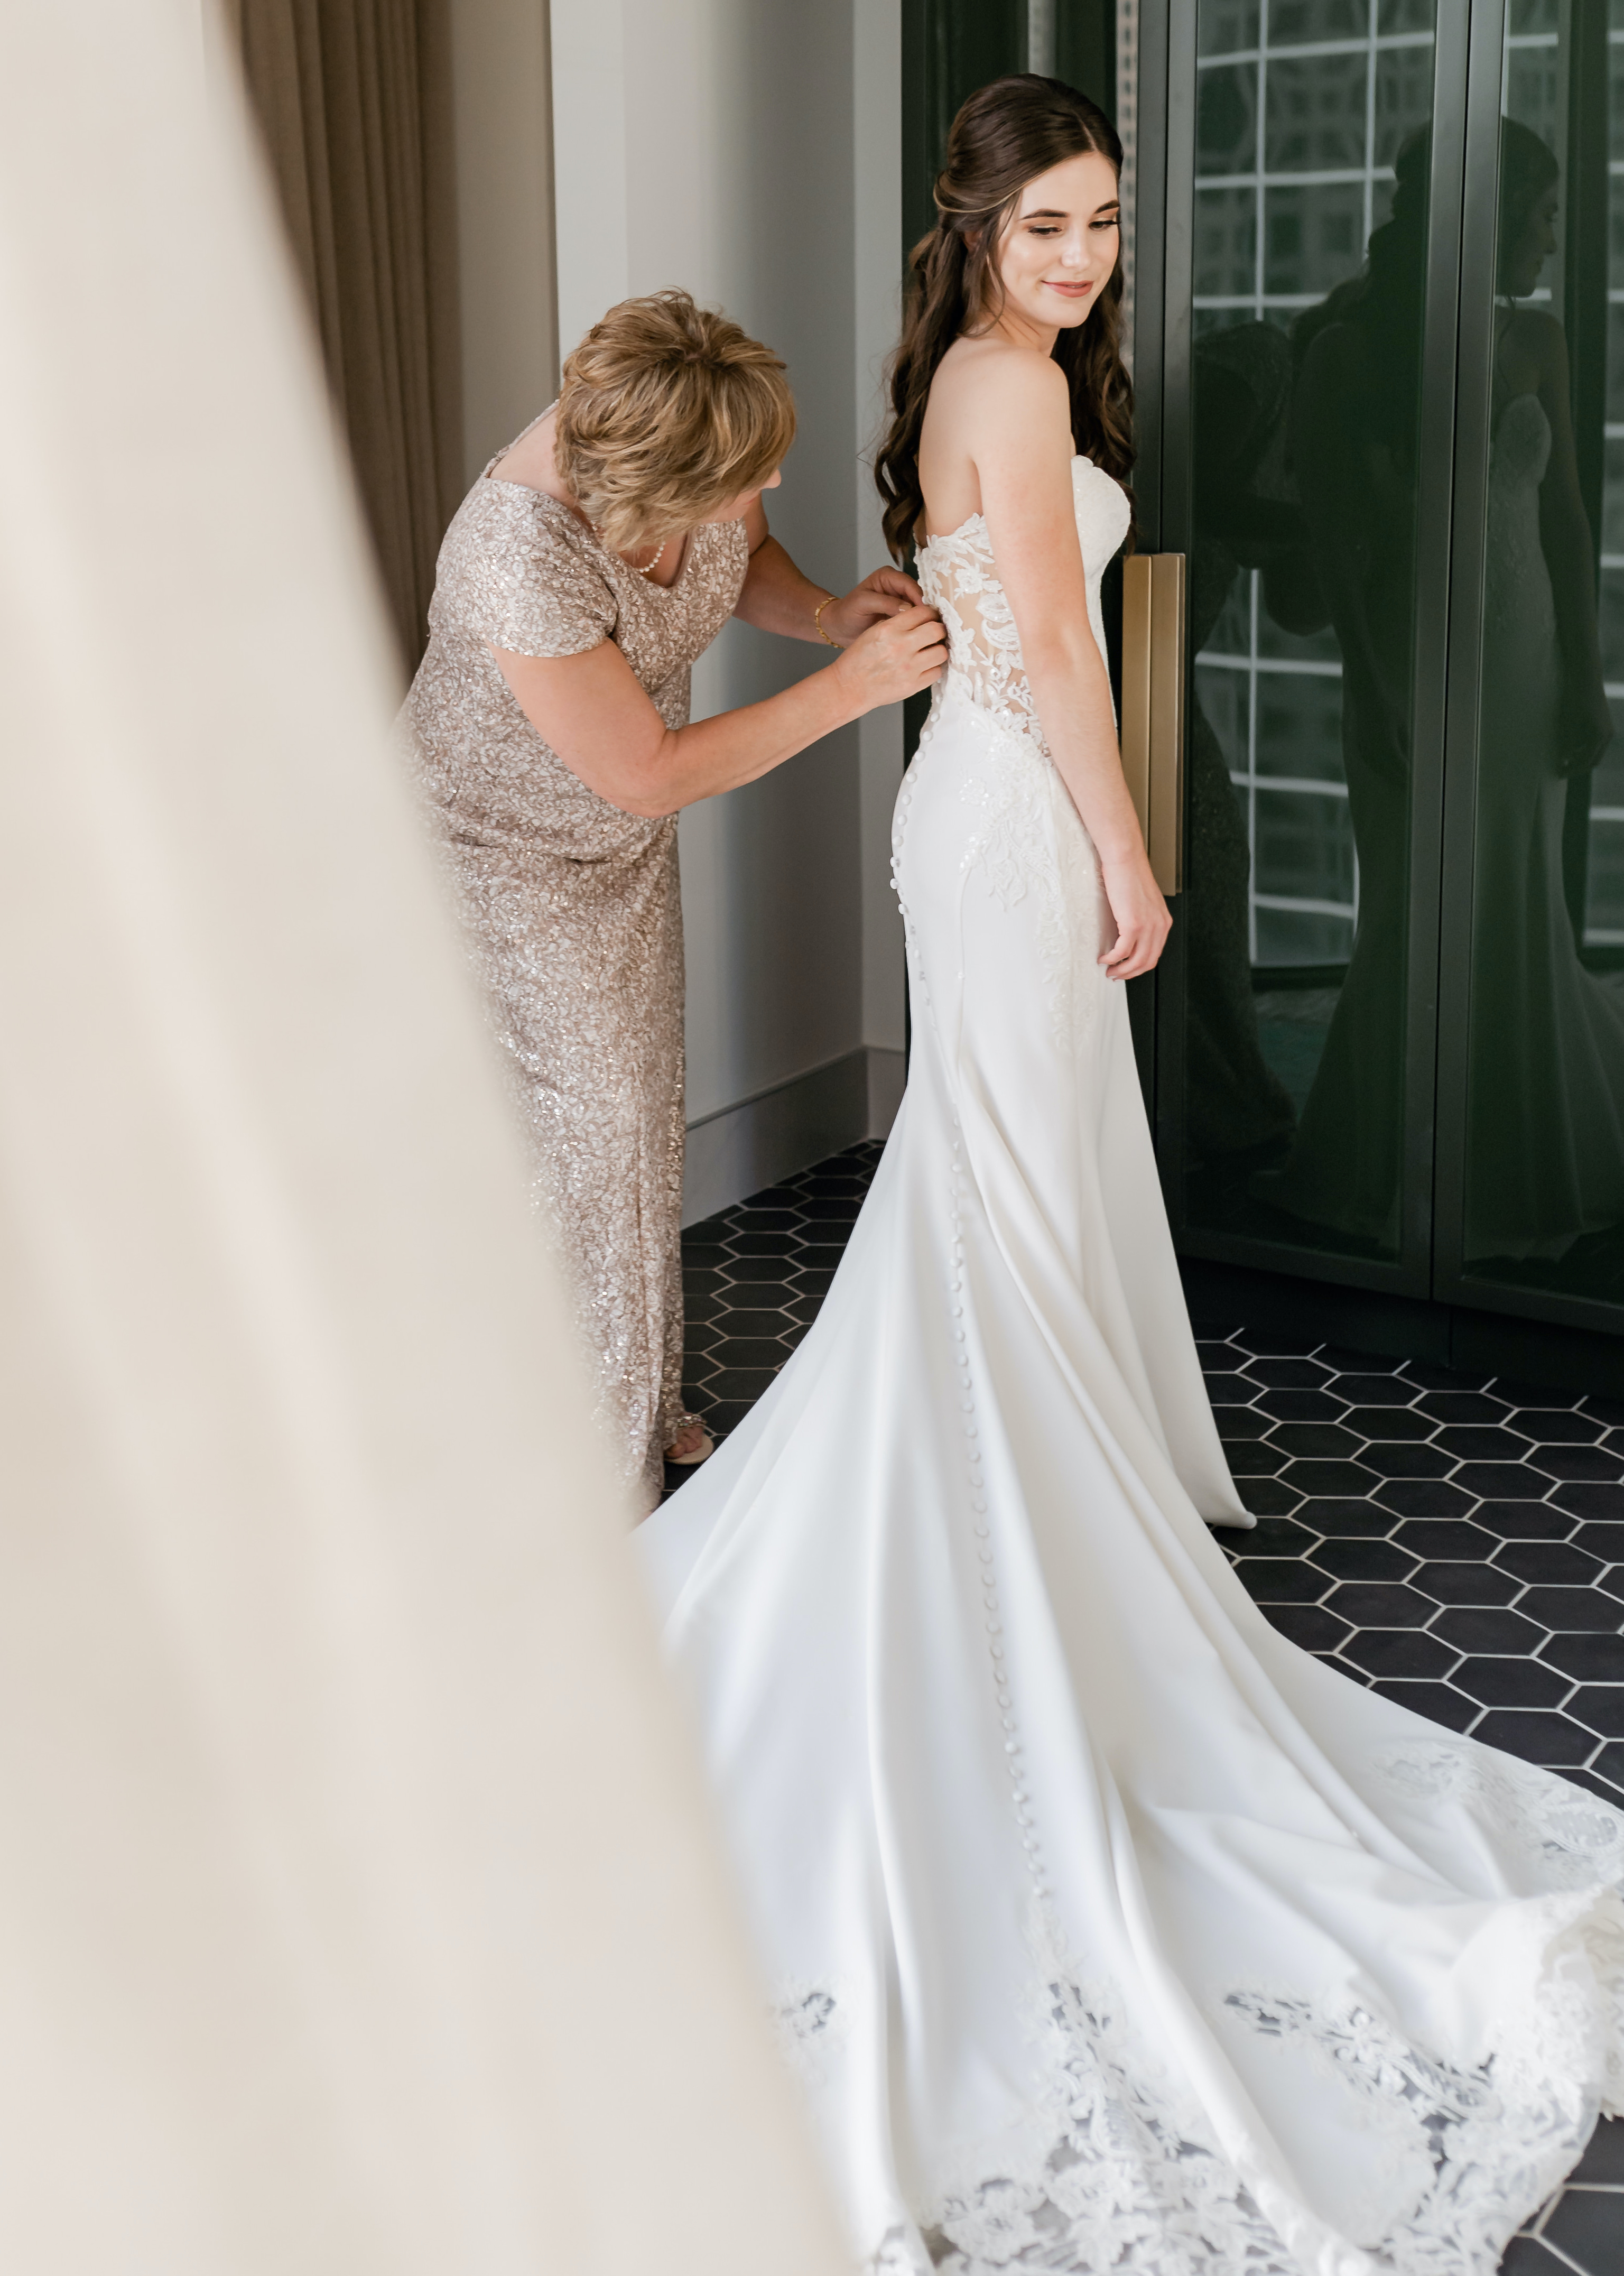 A bride's mother helps her put on her wedding dress before her wedding in Houston, TX.